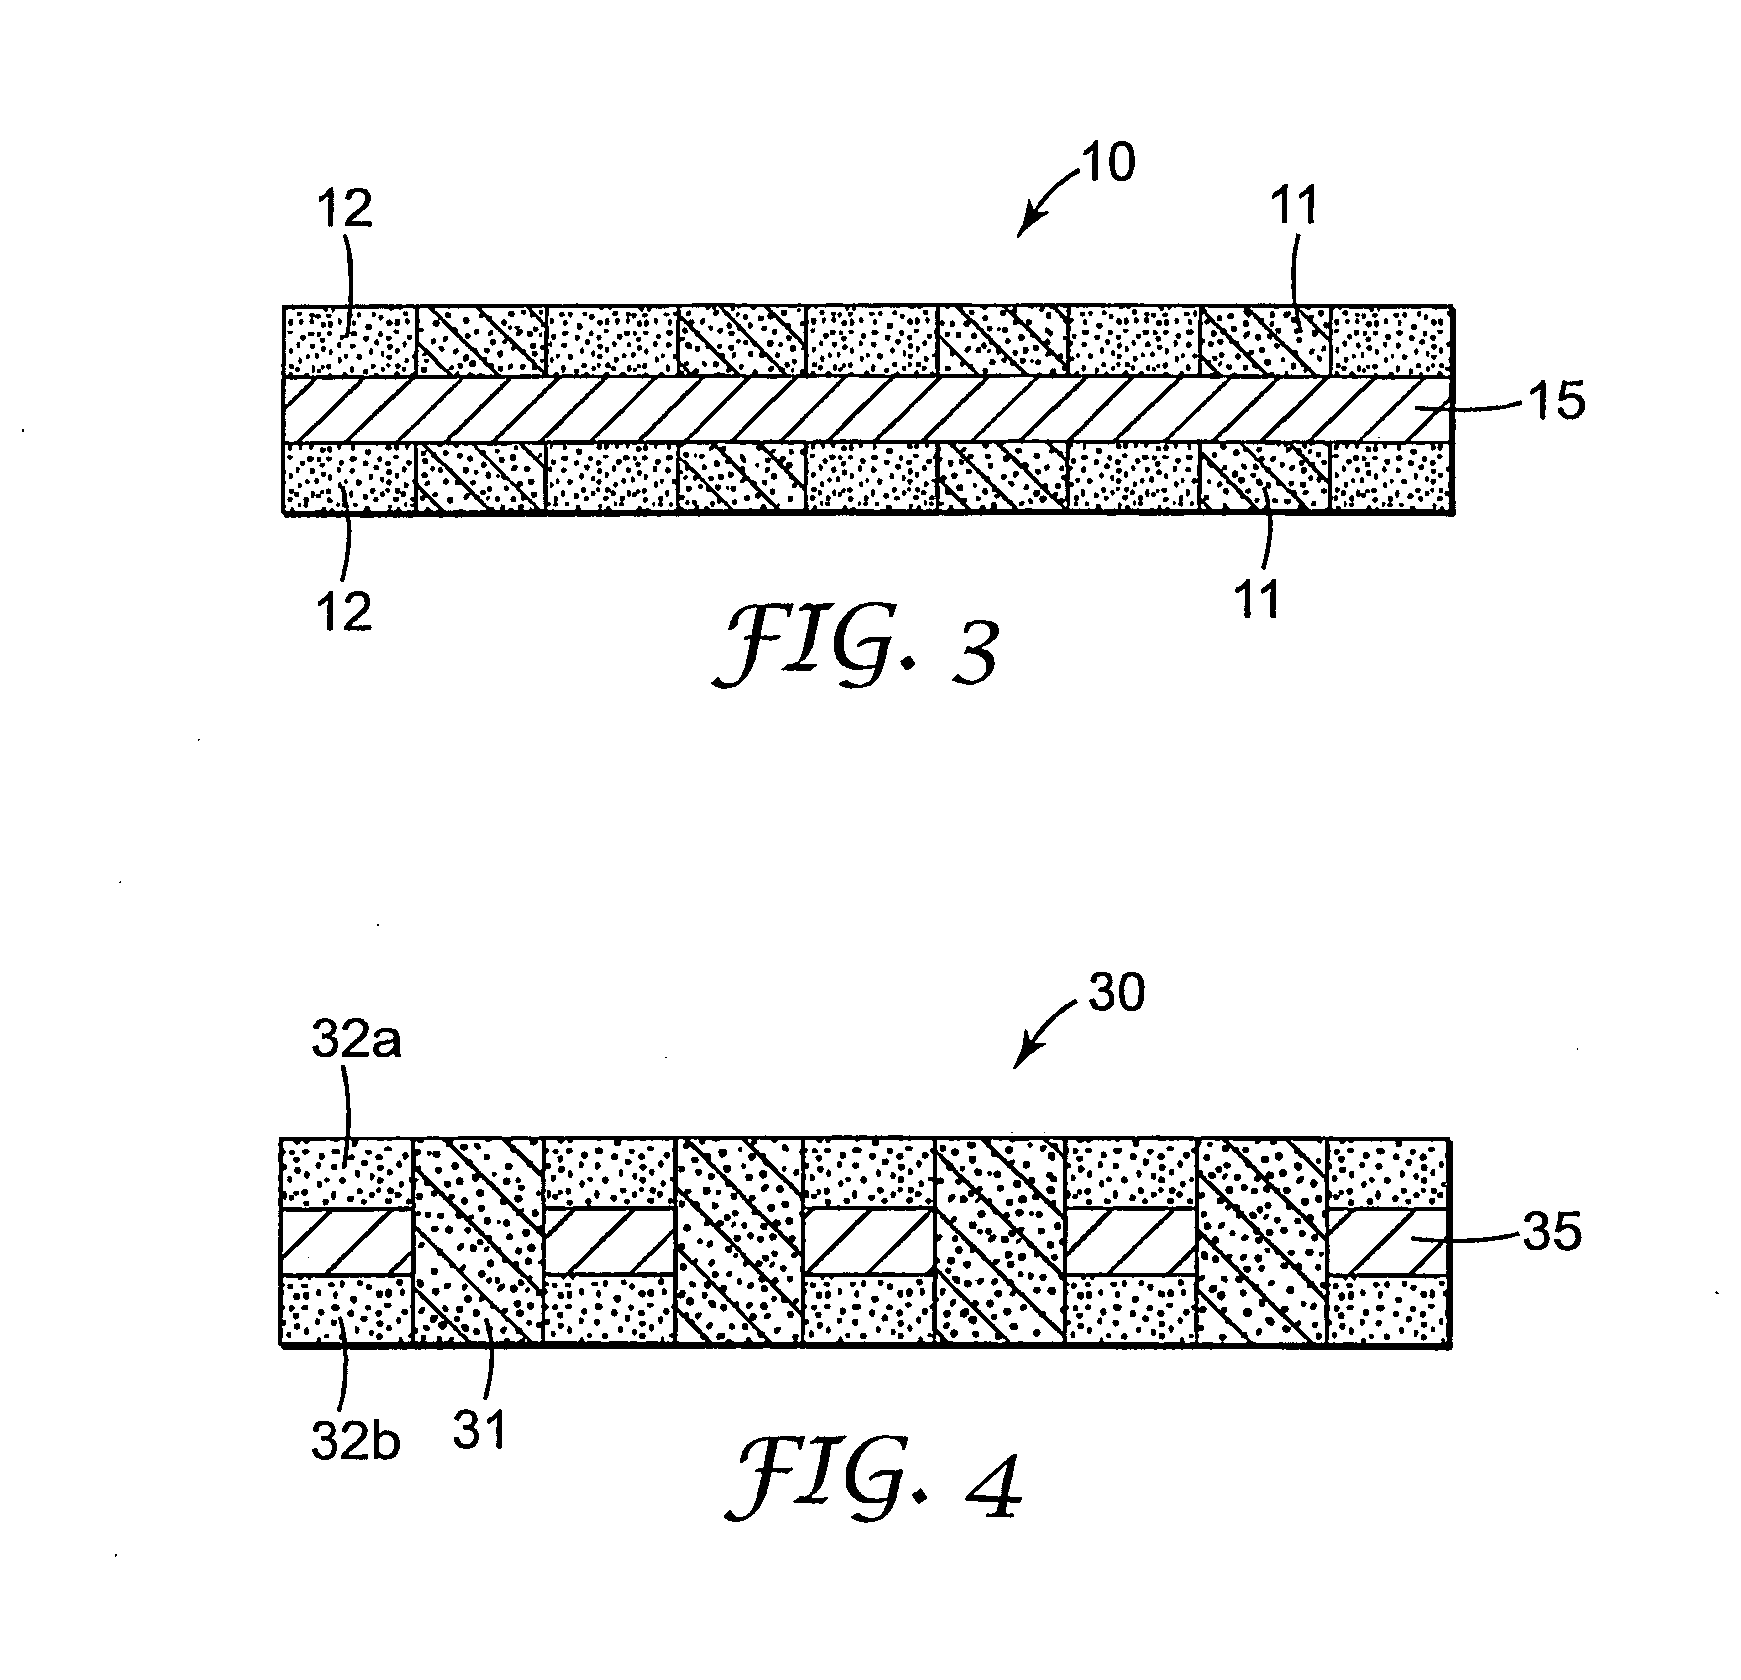 Adhesive Tape For Structural Bonding